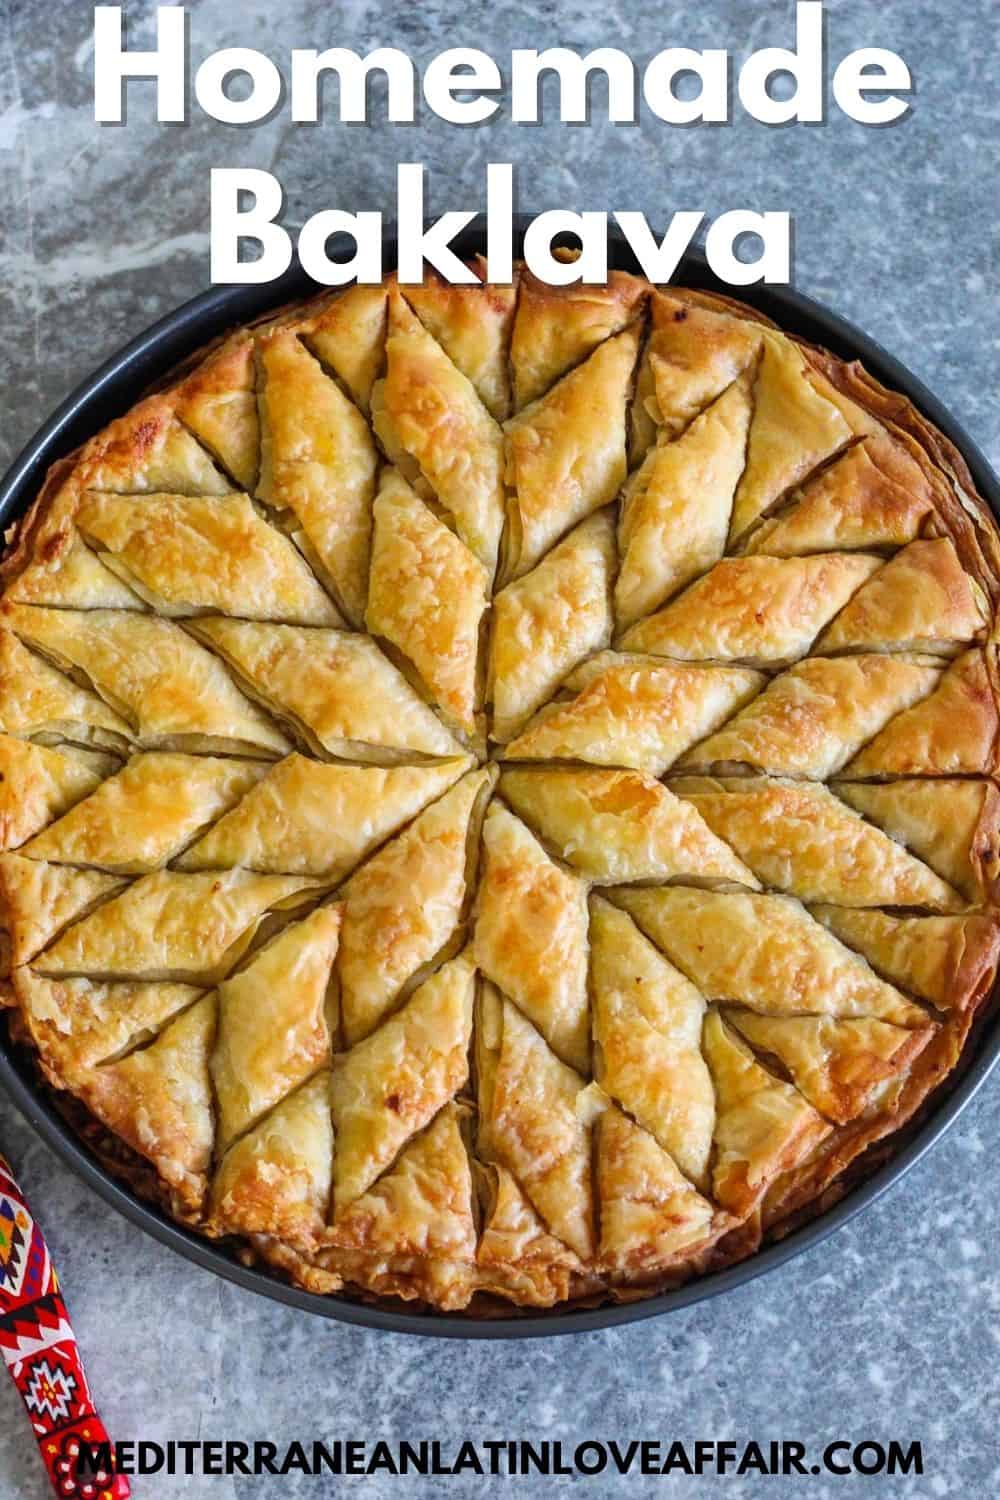 An image prepared specifically for Pinterest. It shows the baked baklava in a baking tray, round shaped. Baklava is cut in diamond shape. There's a title bar over the image that says Homemade Baklava and there's a website link at the bottom of the image. 